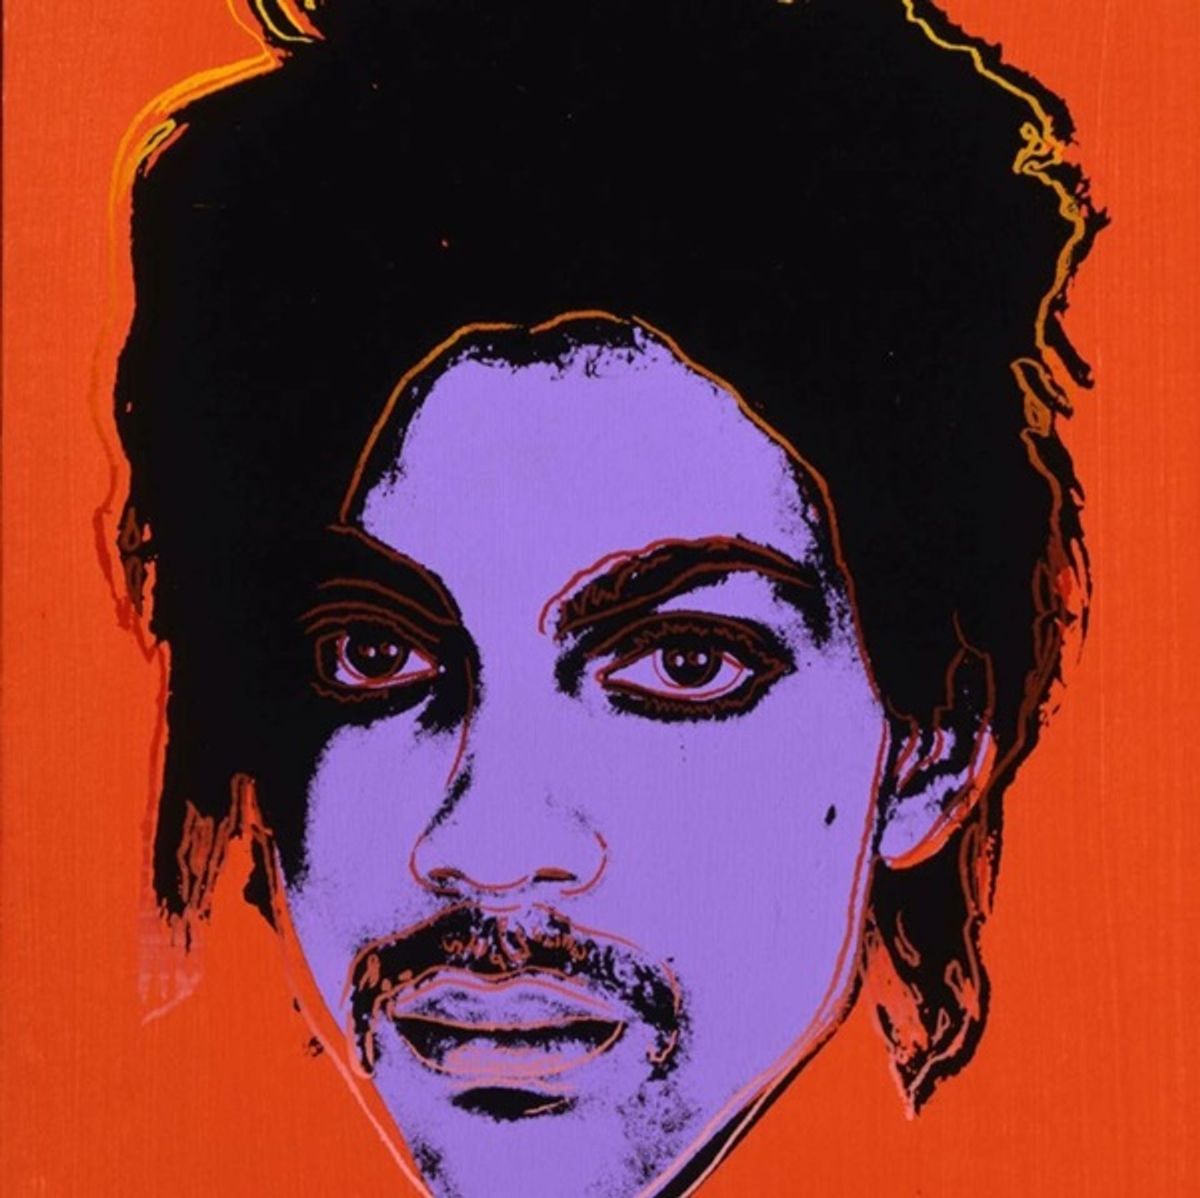 One of Andy Warhol's portraits of Prince, based on an image made by the photographer Lynn Goldsmith